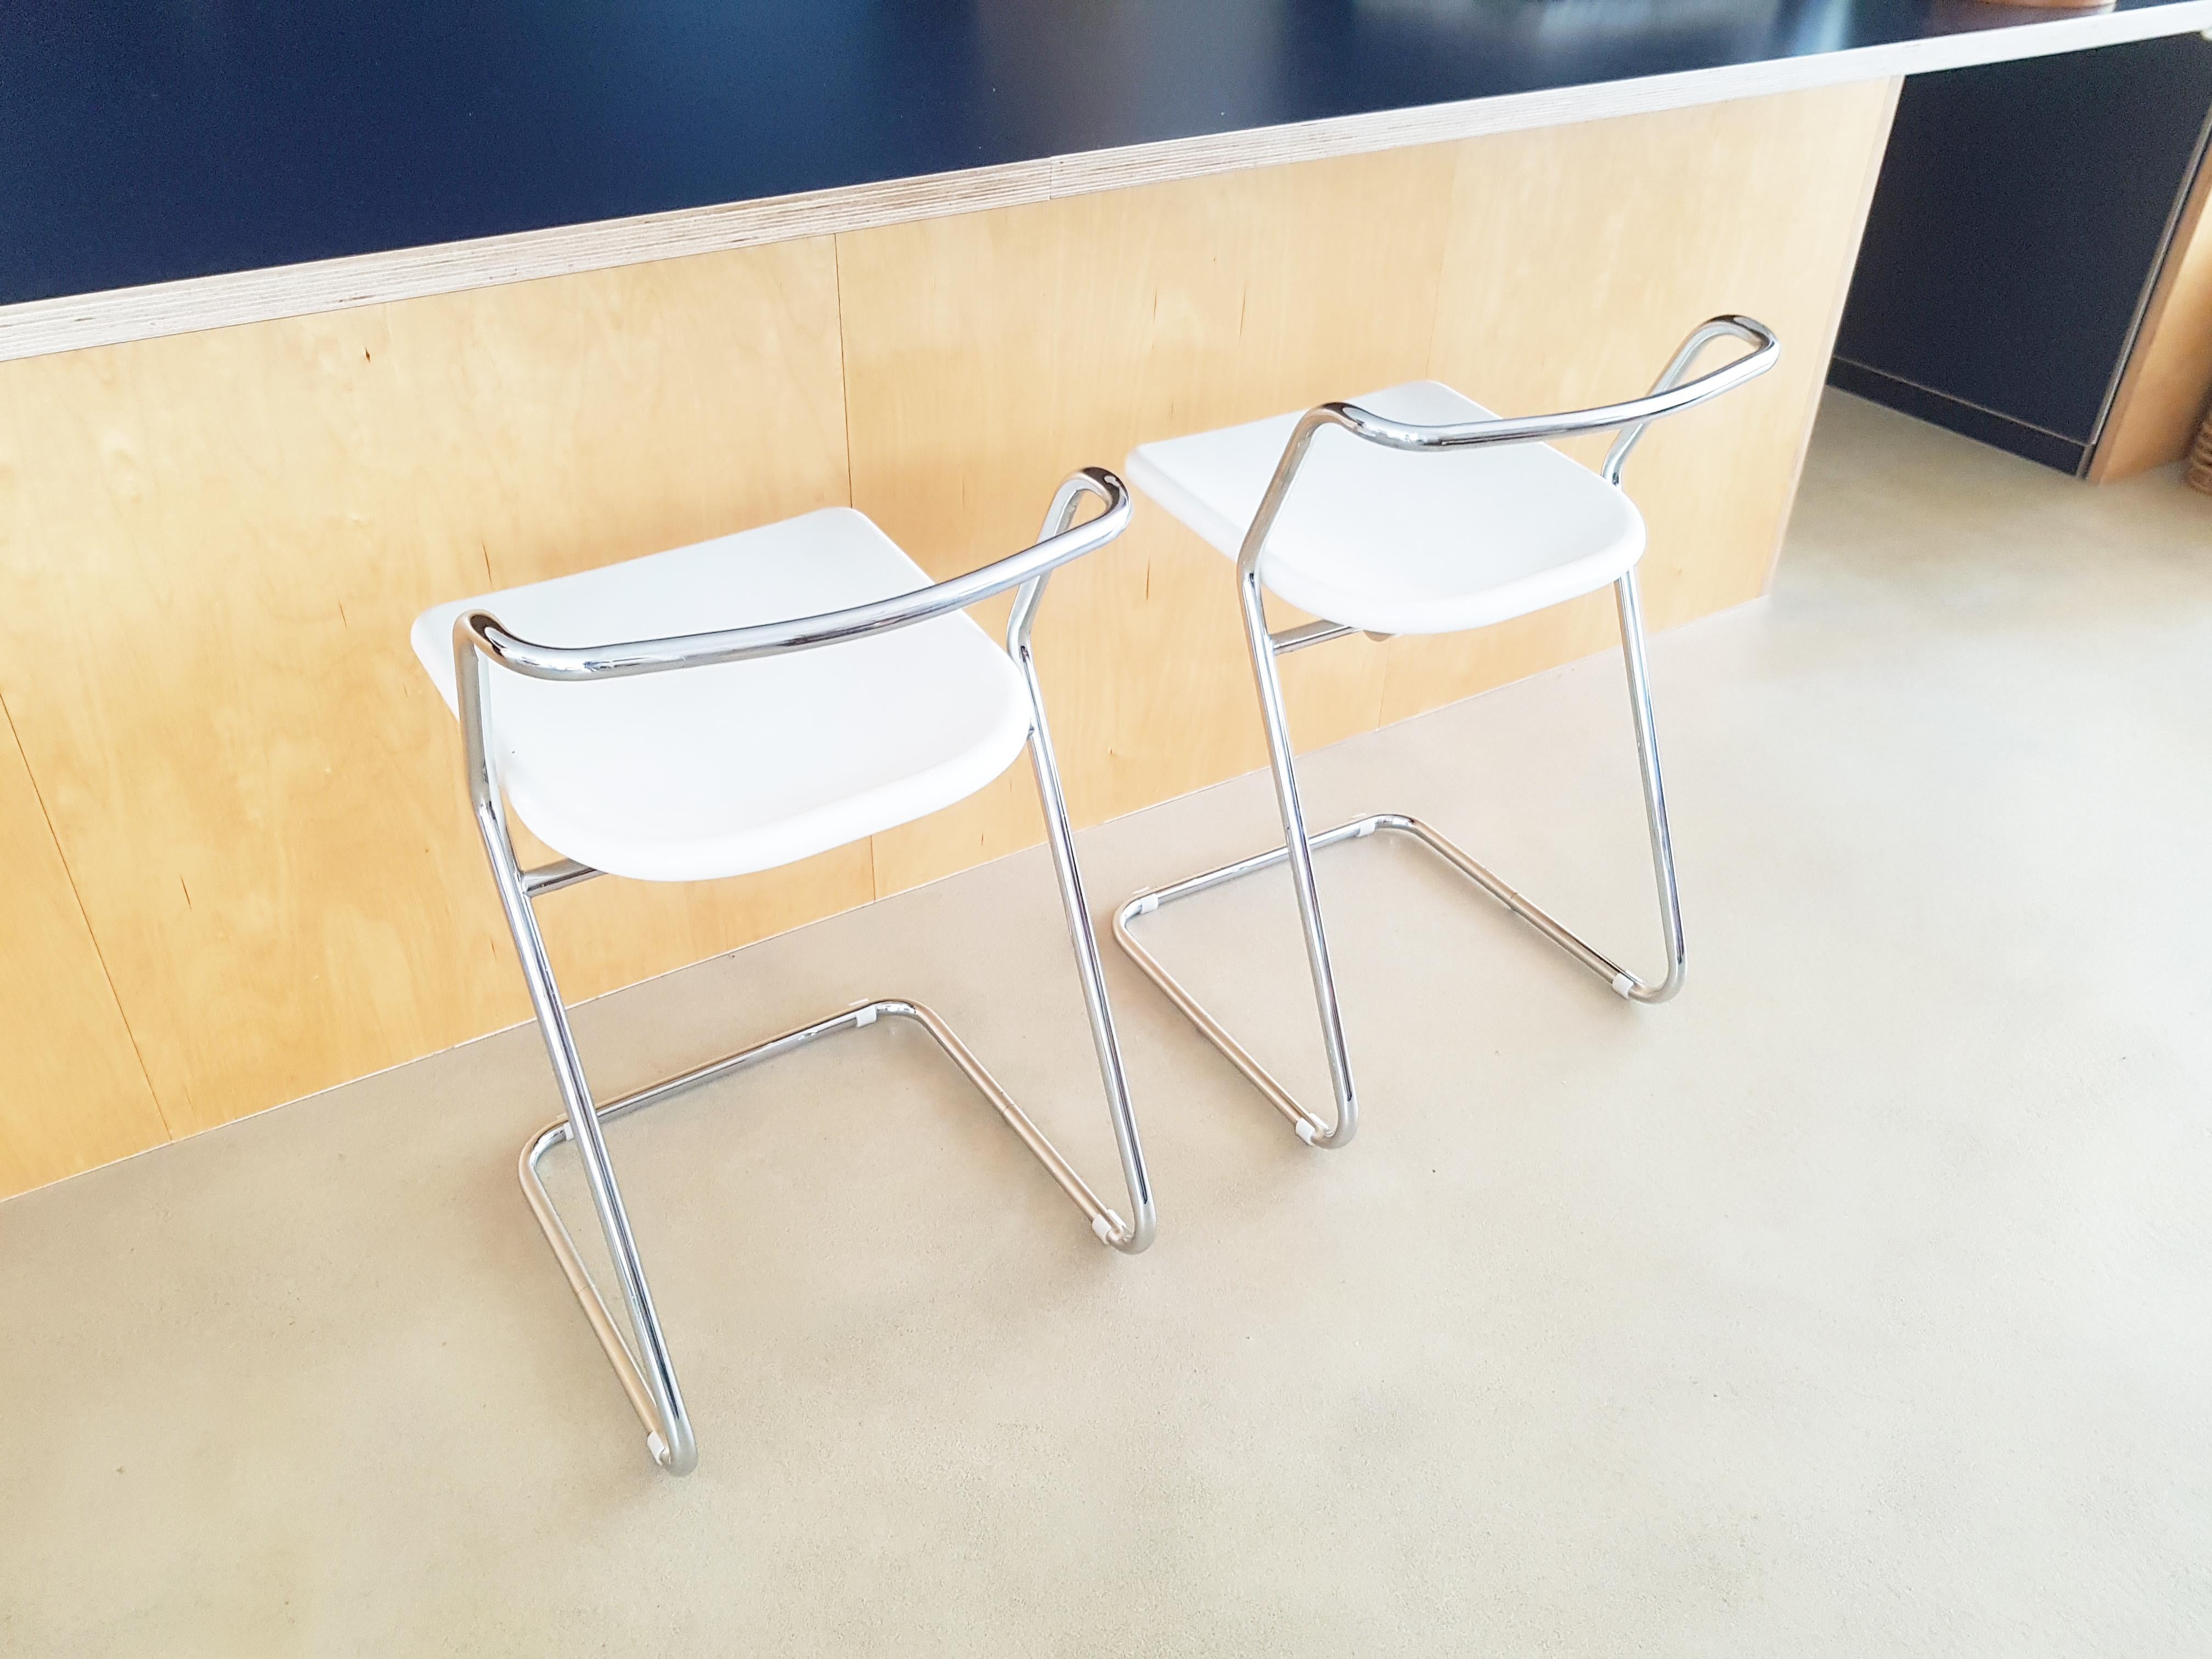 Pair of stool with tubolar chrome plated support and white painted plastic (maybe resine of fiberglass) folding seat. These thick seats are ergonomic and designed to fold away. The tubular structure confers a good comfort thanks to its flexibility